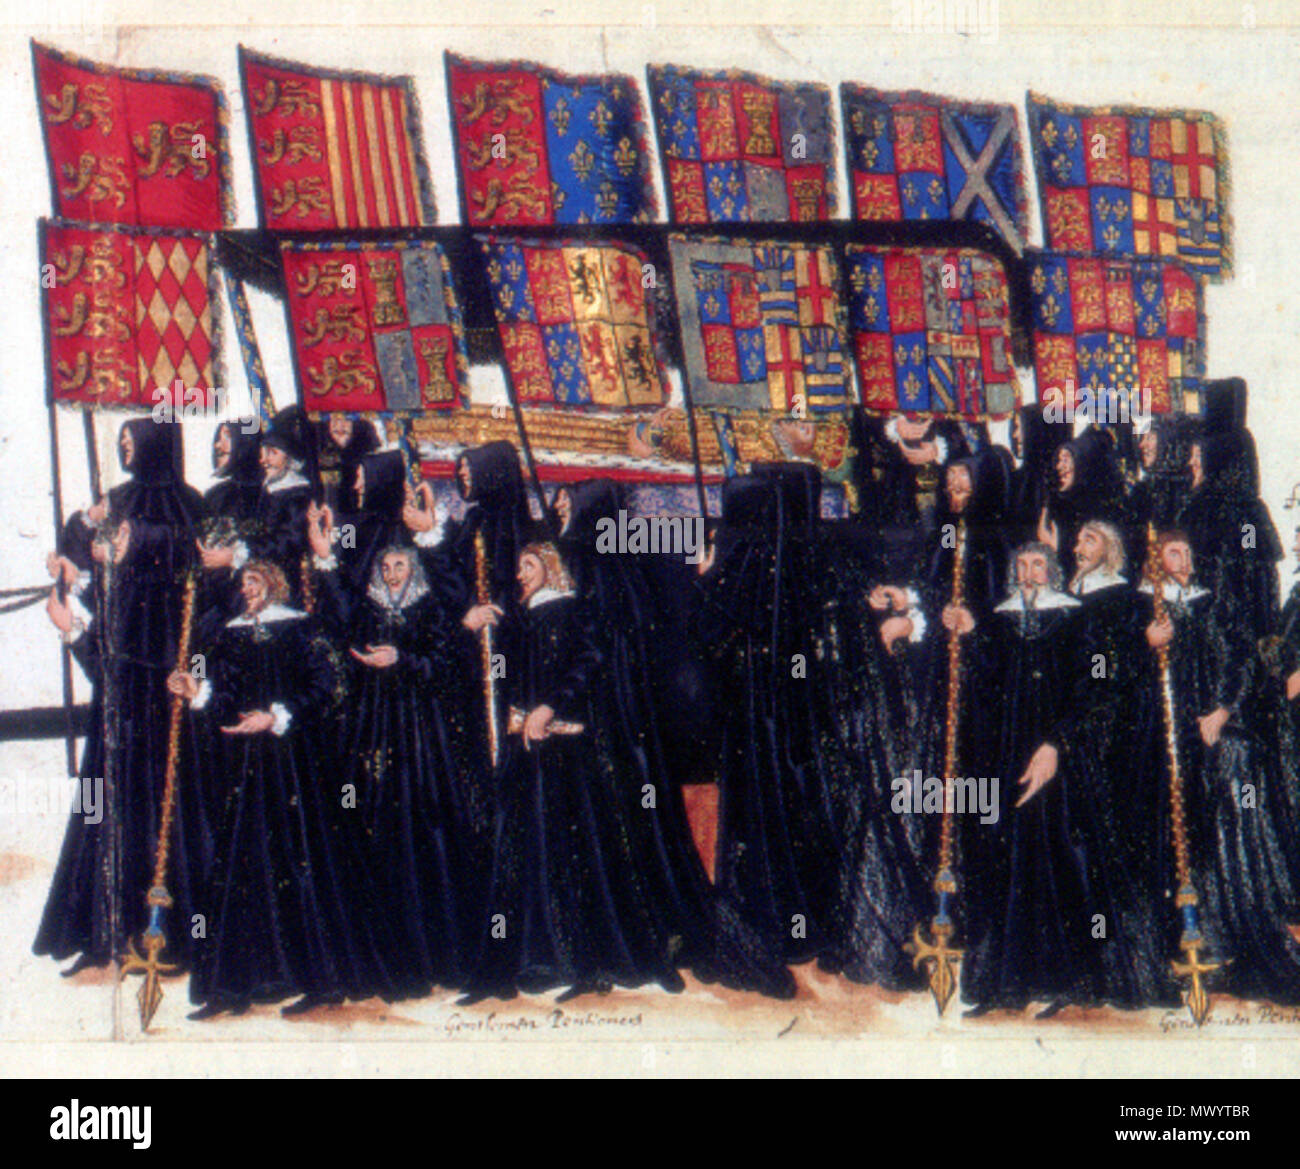 . Deutsch: Trauerzug Elisabeth I English: Banner bearers at the funeral of Elizabeth I of England. The casket of the queen is accompanied by mourners bearing the heraldic banners of her ancestors' coats of arms marshalled (side-by-side) with the arms of their wives. 16 September 2010, 11:12 (UTC).  Funeral Elisabeth.jpg: Unknown derivative work: Jza84 (talk) 232 Funeral Elisabeth (cropped) Stock Photo